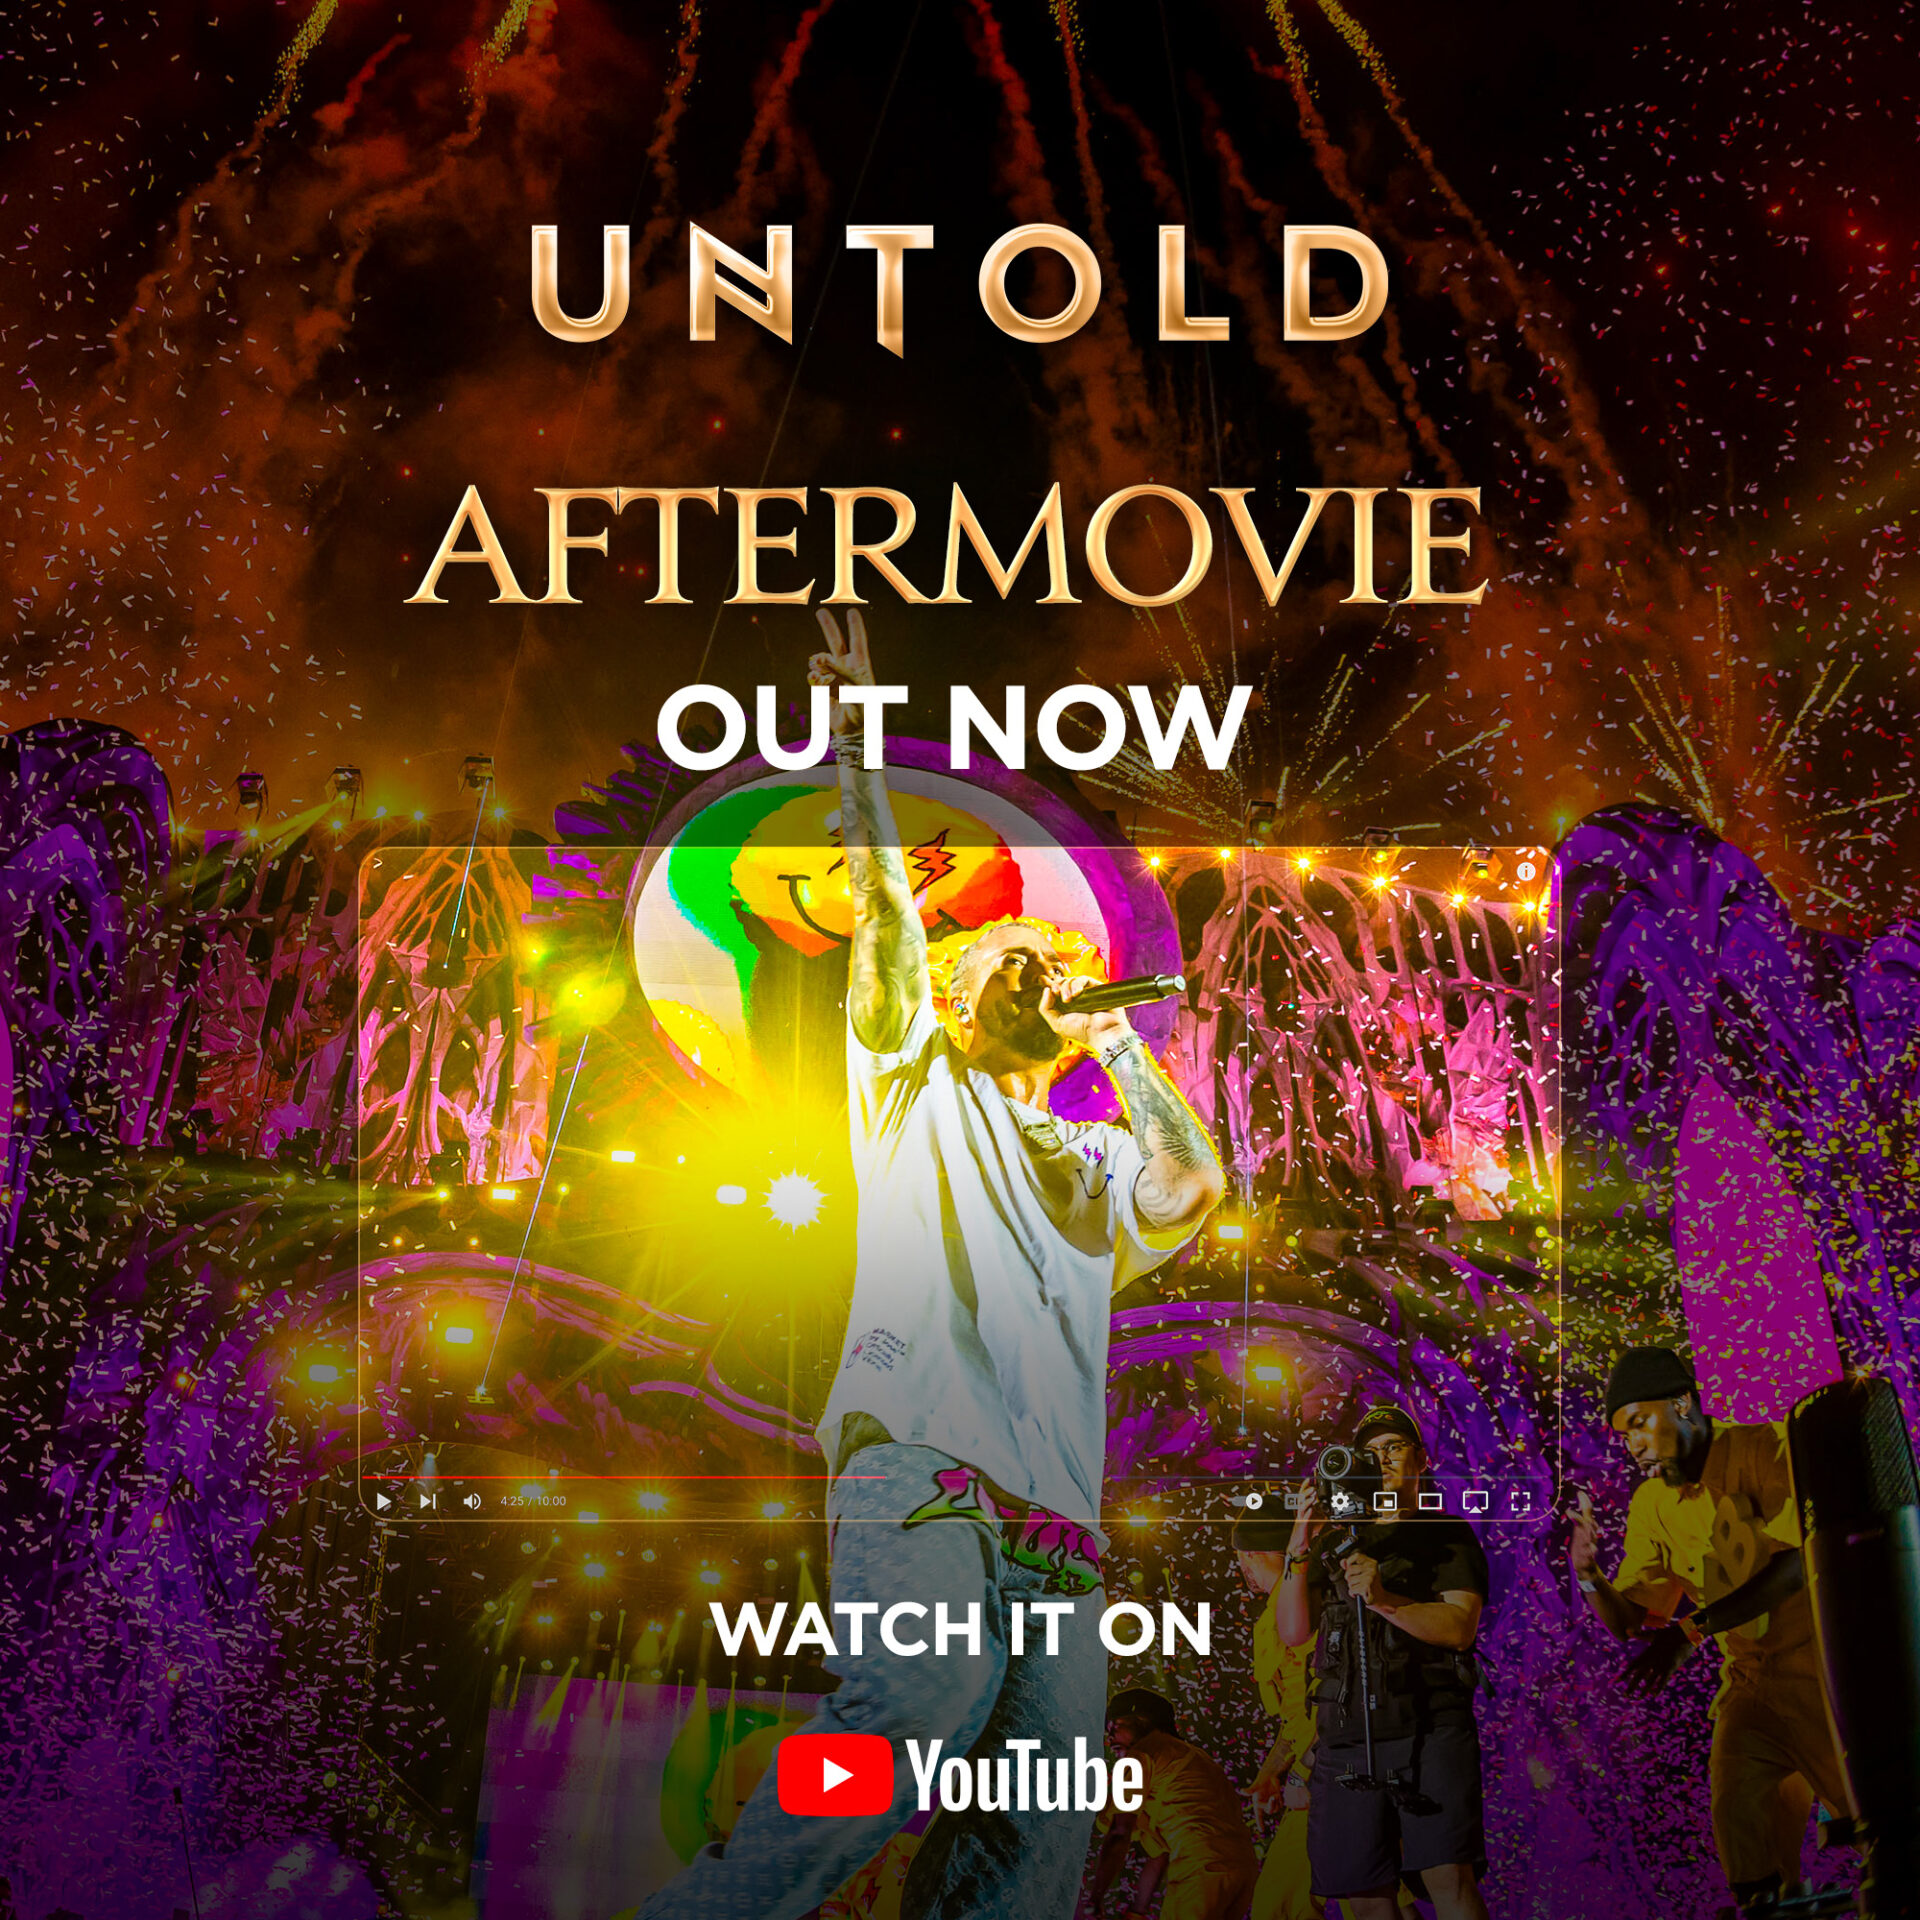 THE UNTOLD 2022 AFTERMOVIE IS OUT NOW